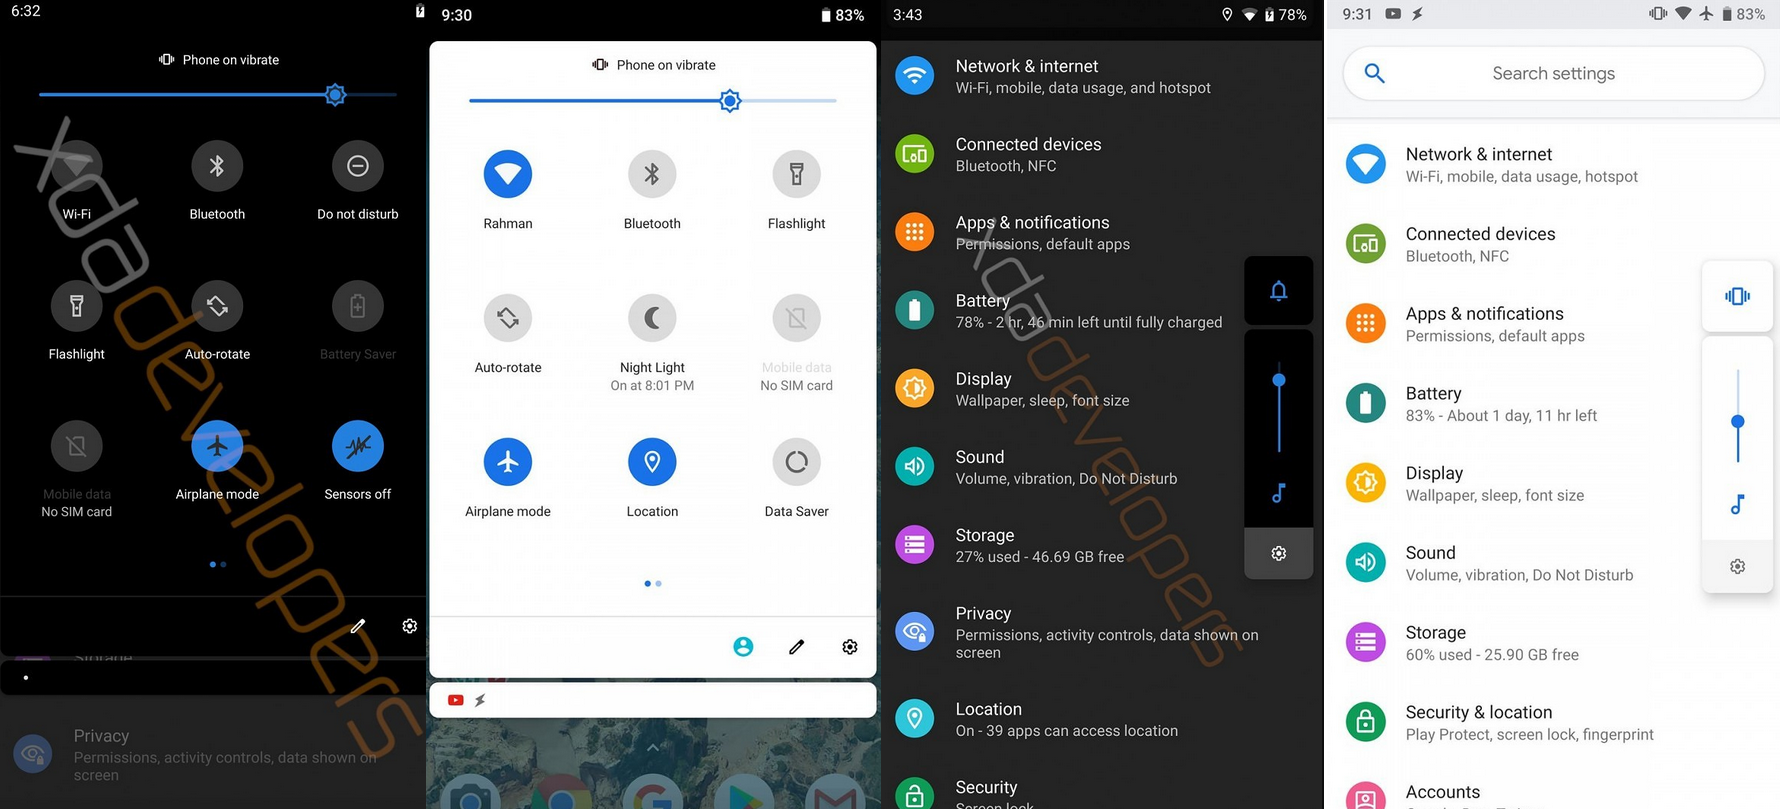 System-wide Dark Mode on Android Q compared with Light Mode on Android Pie - Android Q's system-wide Dark Mode could work with some third party apps